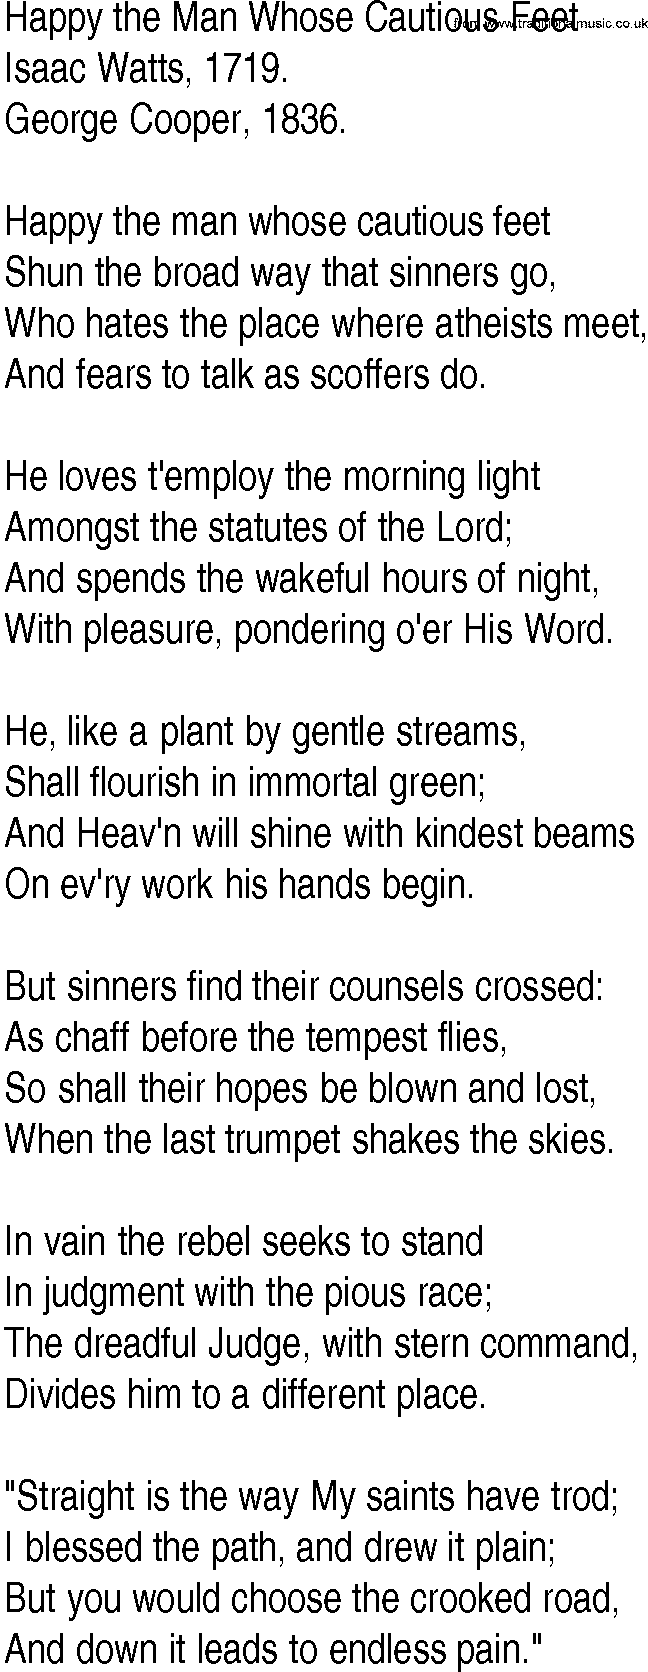 Hymn and Gospel Song: Happy the Man Whose Cautious Feet by Isaac Watts lyrics